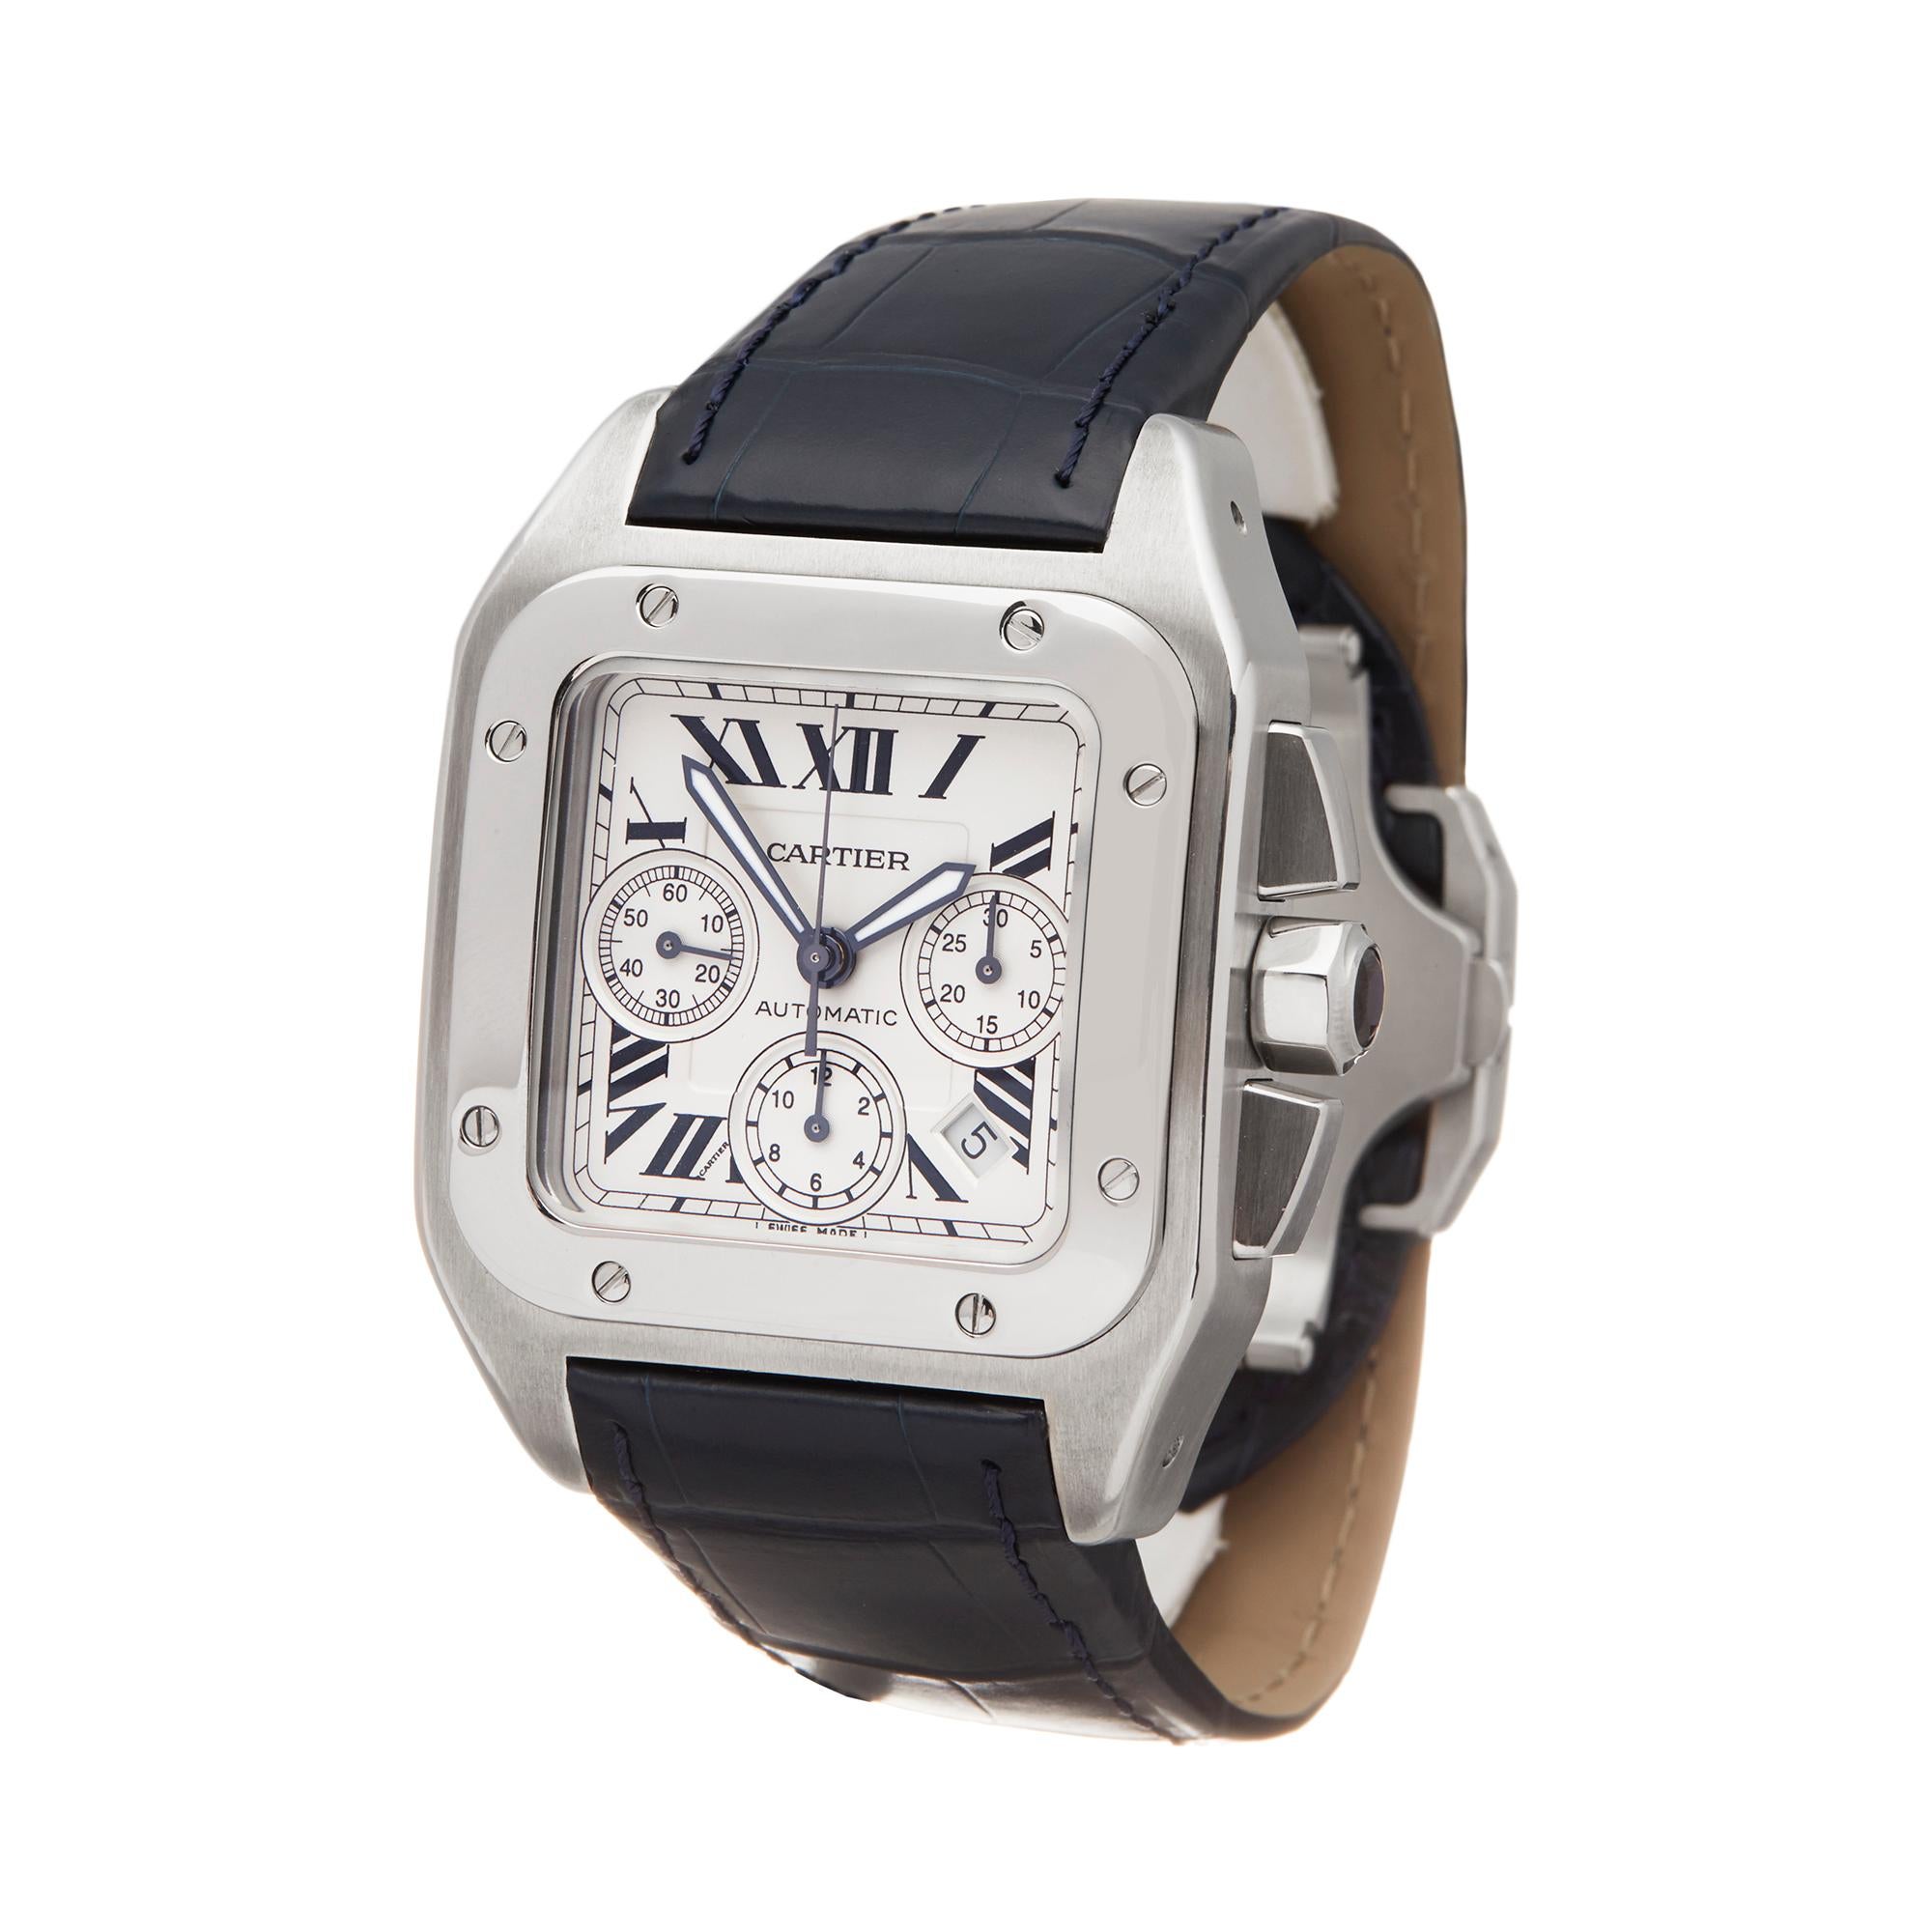 Reference: W5814
Manufacturer: Cartier
Model: Santos 100
Model Reference: 2740 or W20090X8
Age: Circa 2010's
Gender: Men's
Box and Papers: Box Only
Dial: Silver
Glass: Sapphire Crystal
Movement: Automatic
Water Resistance: To Manufacturers